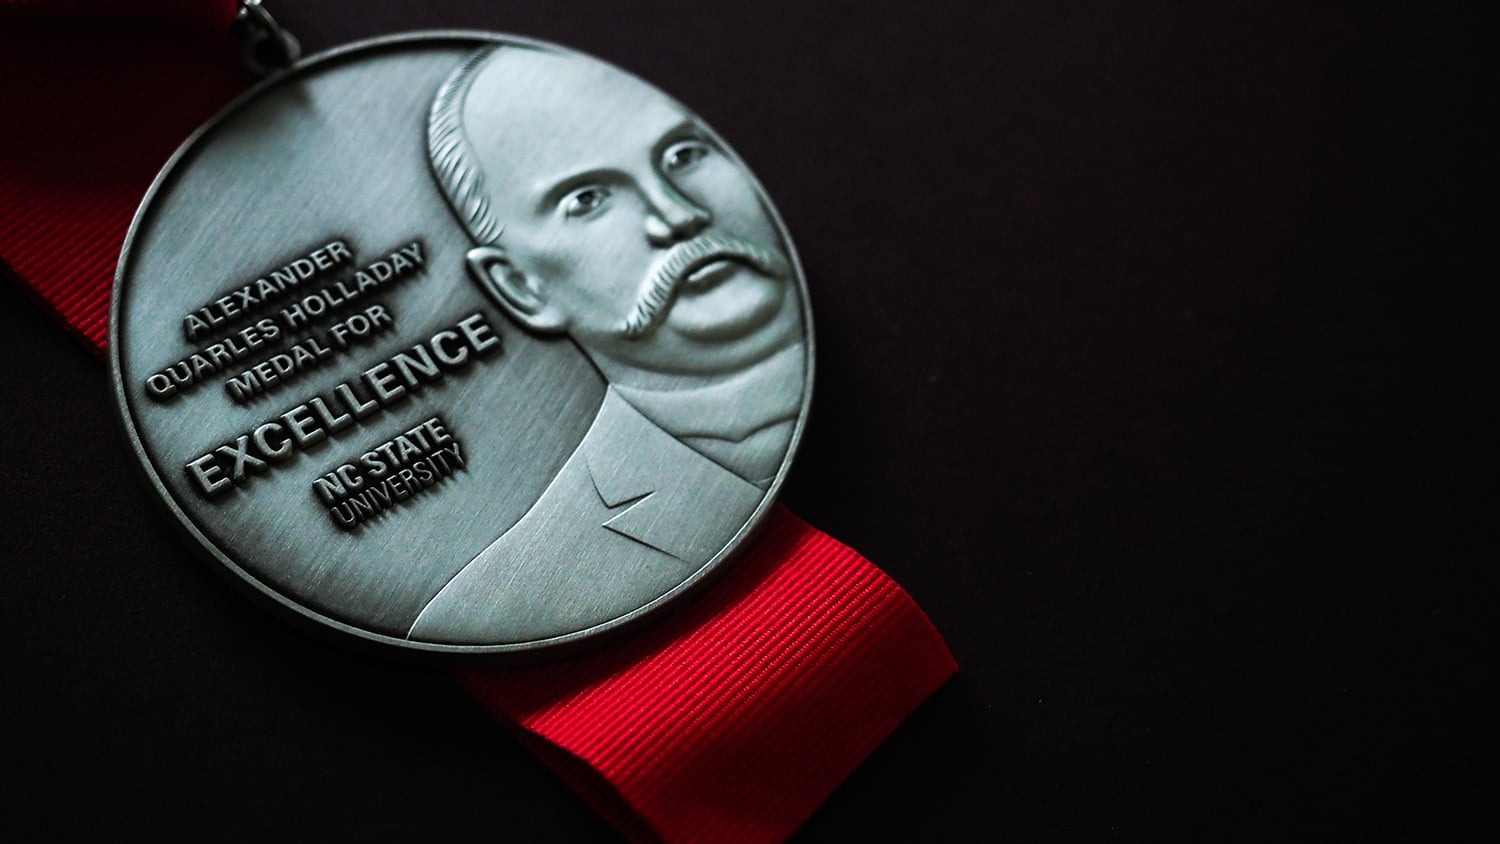 The Alexander Quarles Holladay medal for excellence